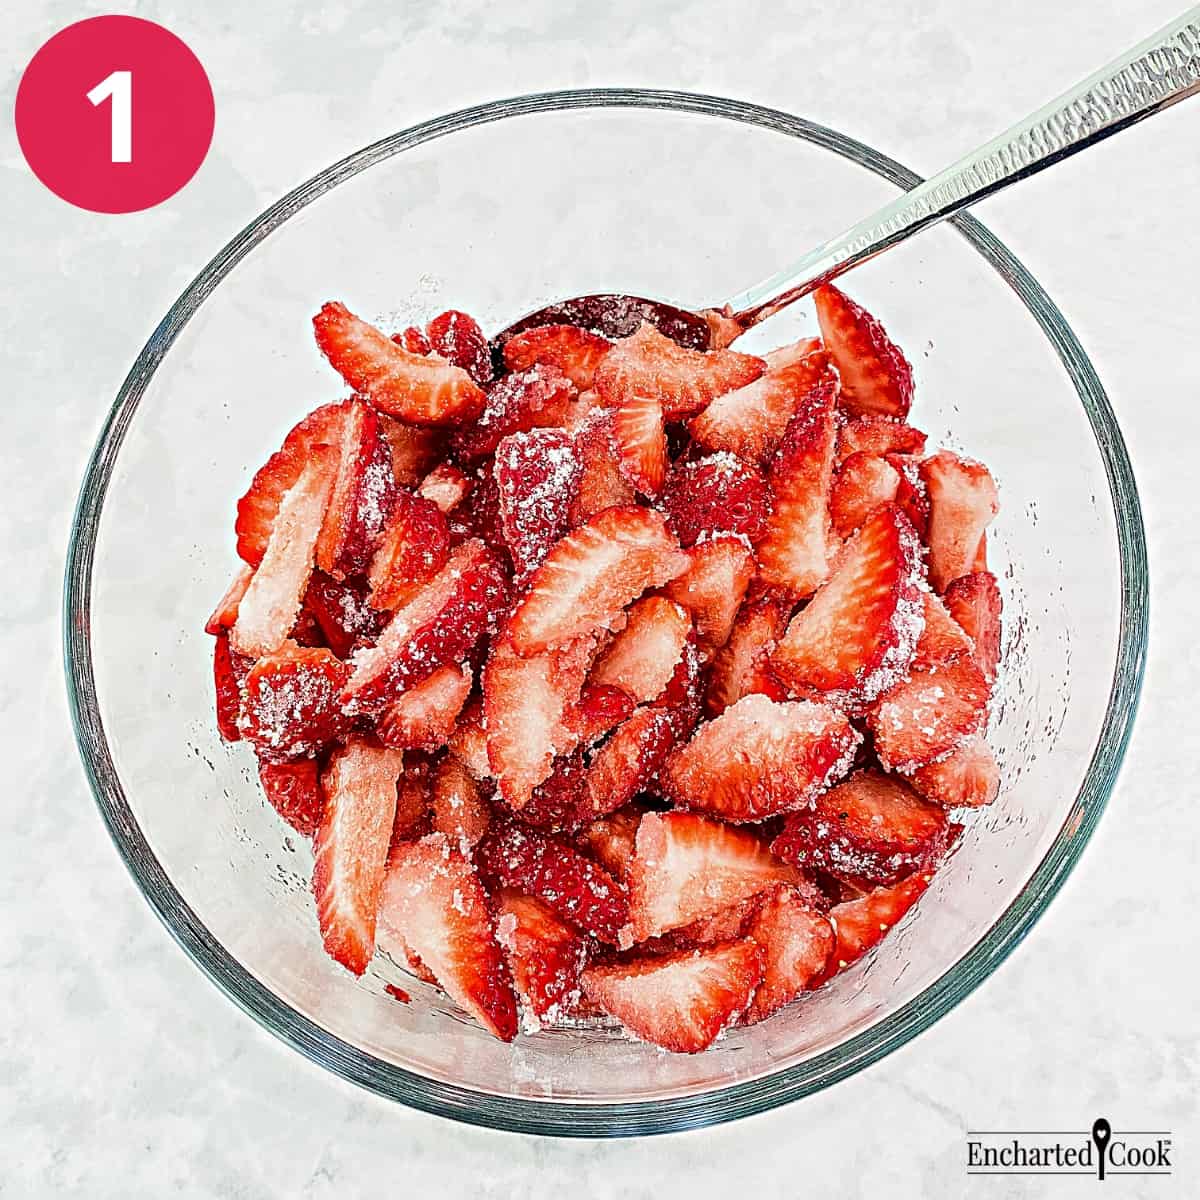 Process Photo 1 - Sugar has been added to sliced strawberries in a mixing bowl.